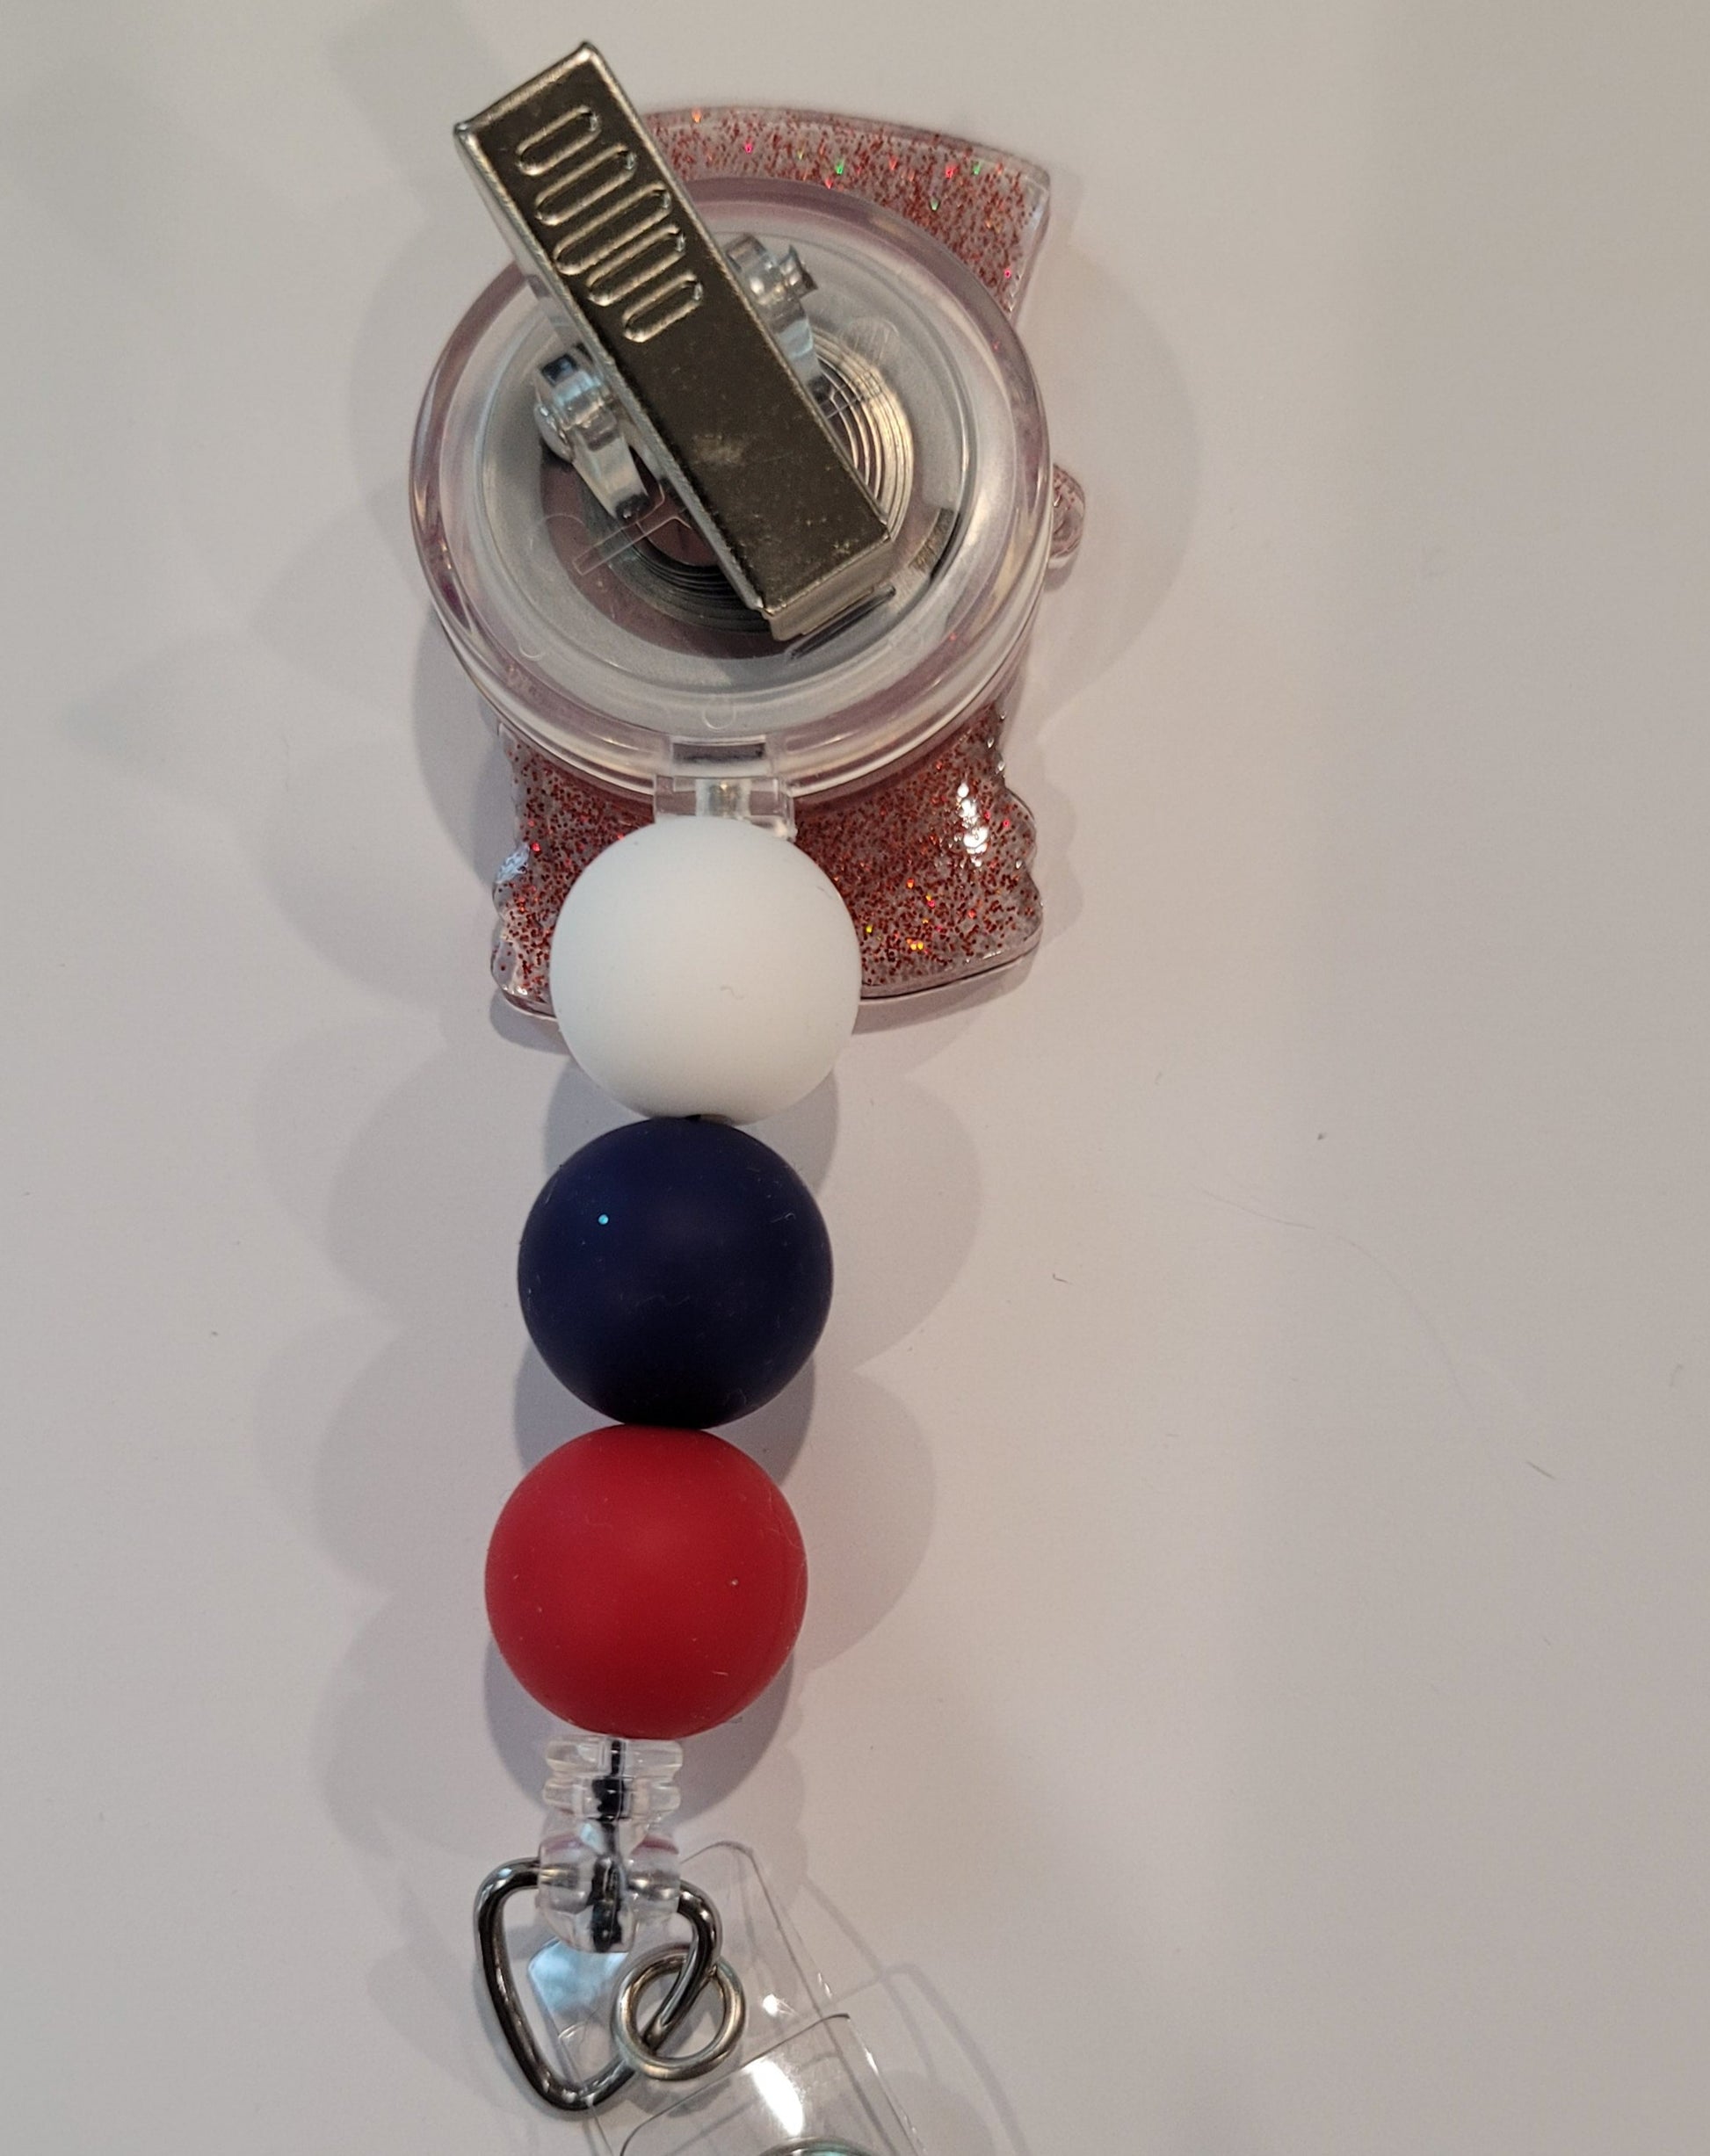 This playful badge reel features an adorable Patriotic Gnome channeling Uncle Sam, complete with a heart in hand. The design is topped off with a sparkly red backing and patriotic red, white, and blue silicone beads.